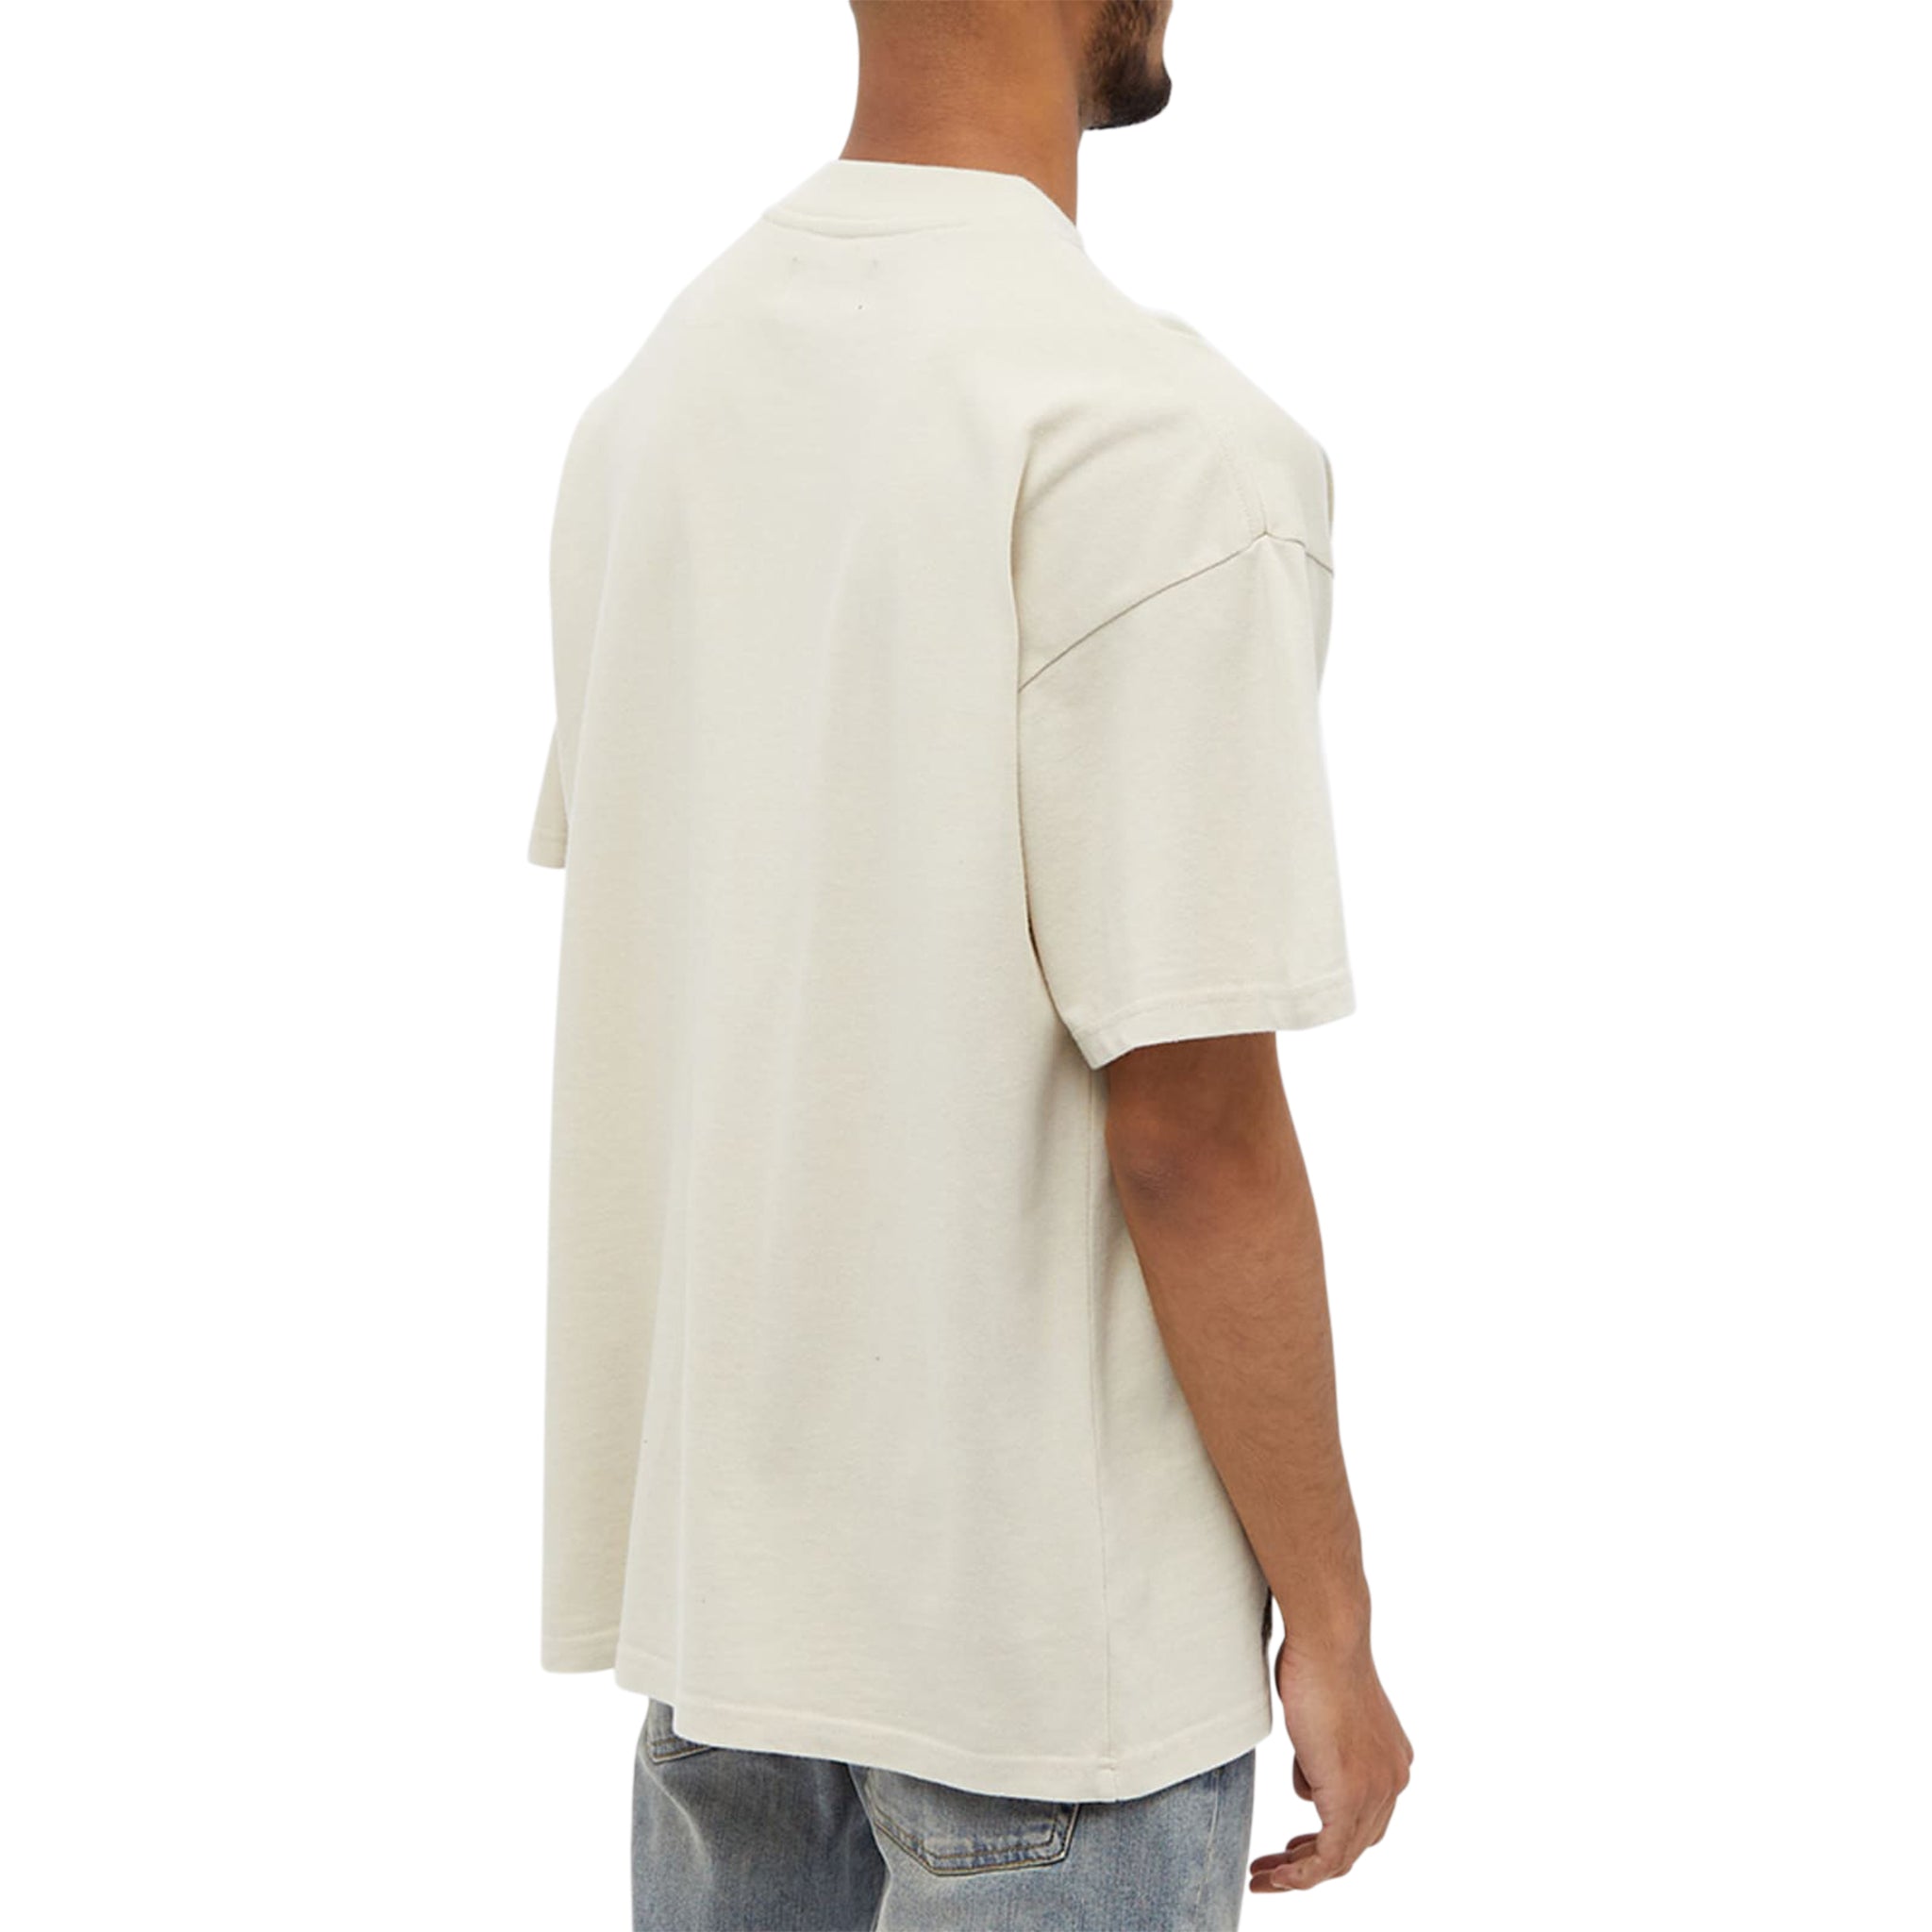 Model back view of Represent Thoroughbred Vintage White T Shirt M05147-20